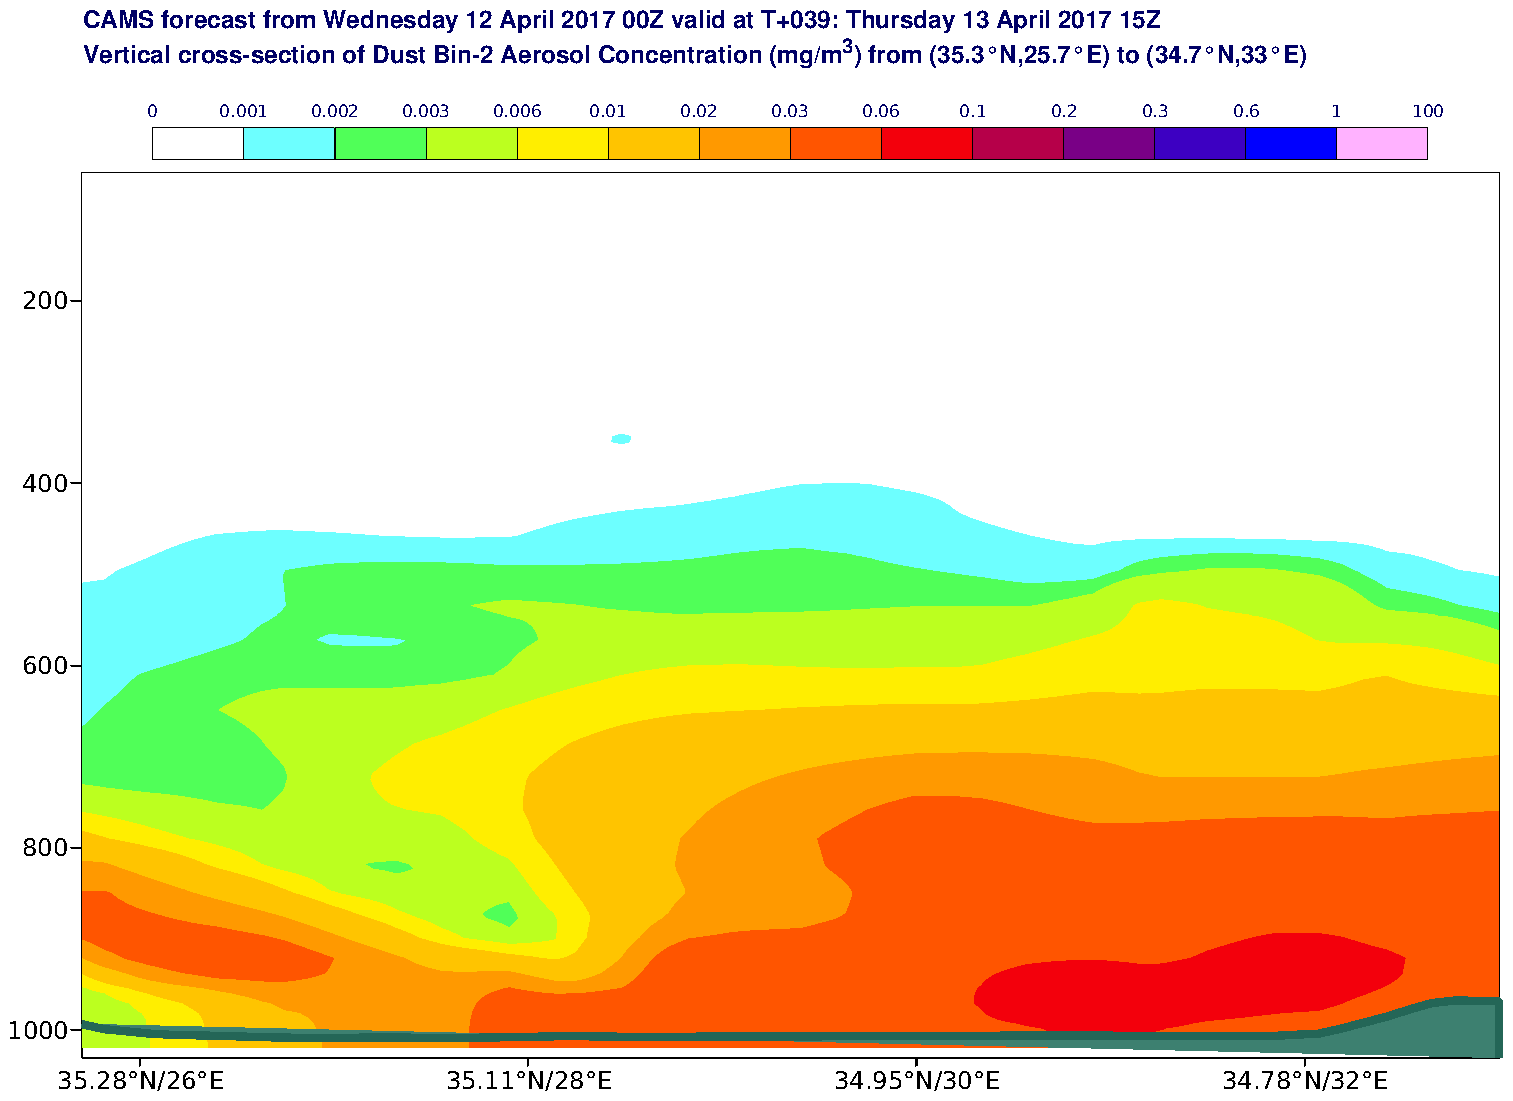 Vertical cross-section of Dust Bin-2 Aerosol Concentration (mg/m3) valid at T39 - 2017-04-13 15:00